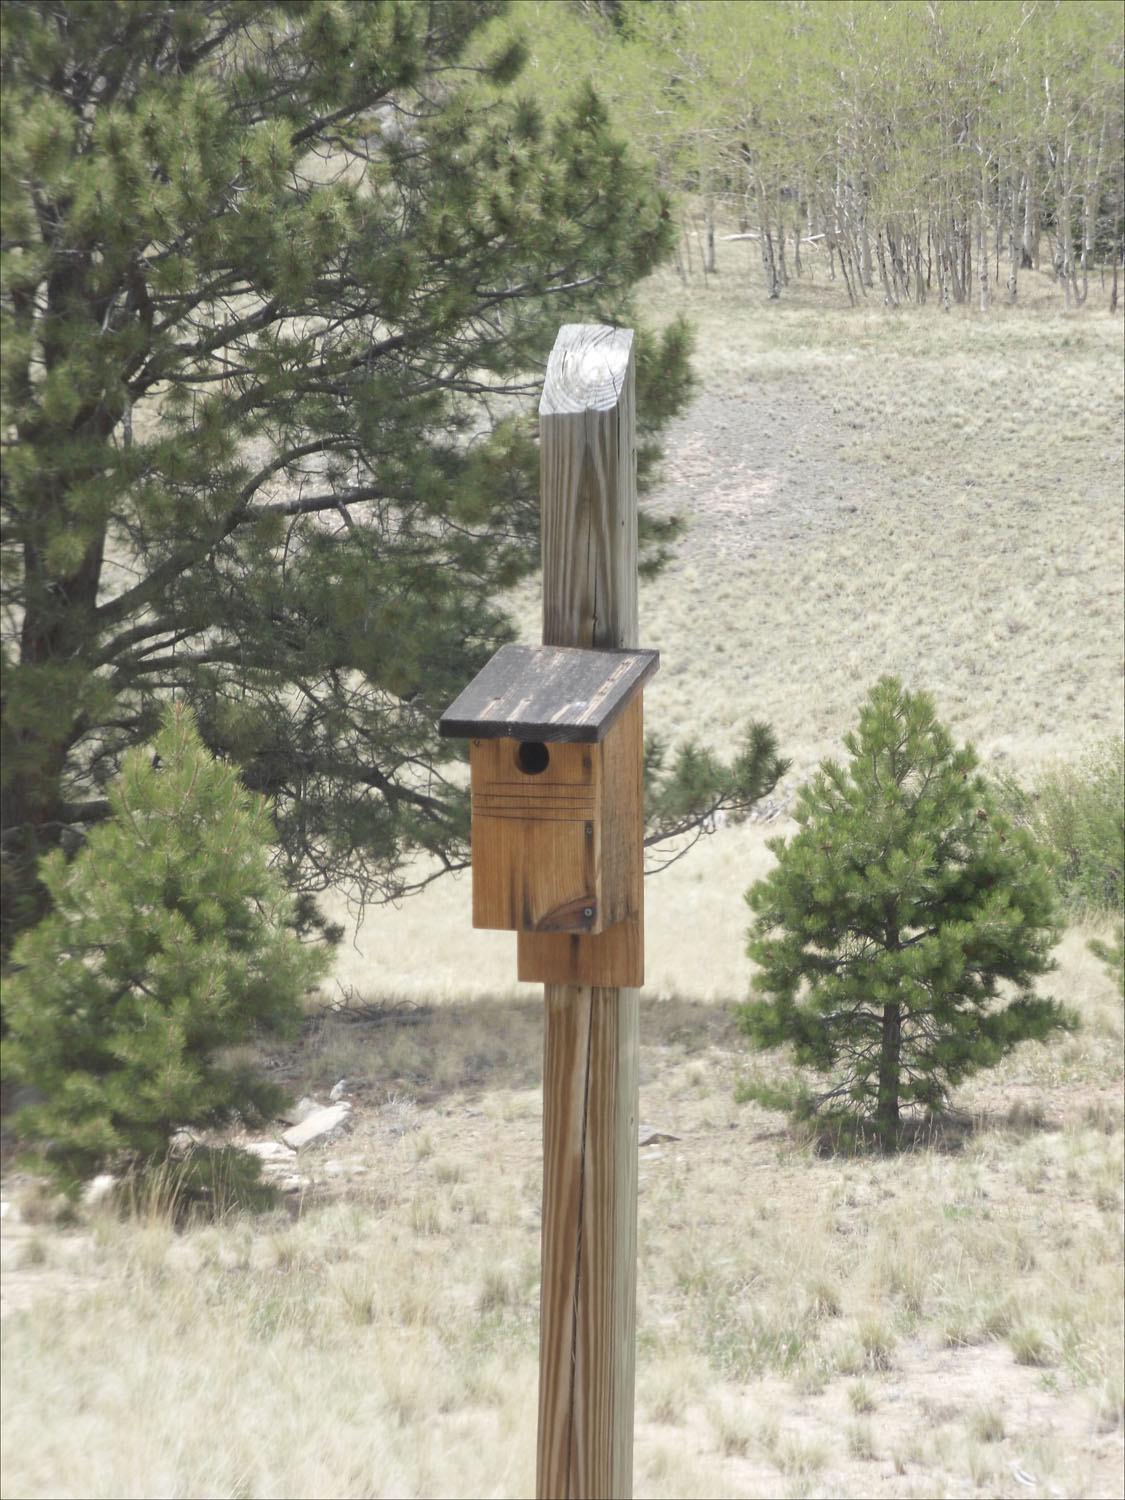 South Park Vicinity, CO-we saw hundreds of these along the road on fences, homes for the little blue bird